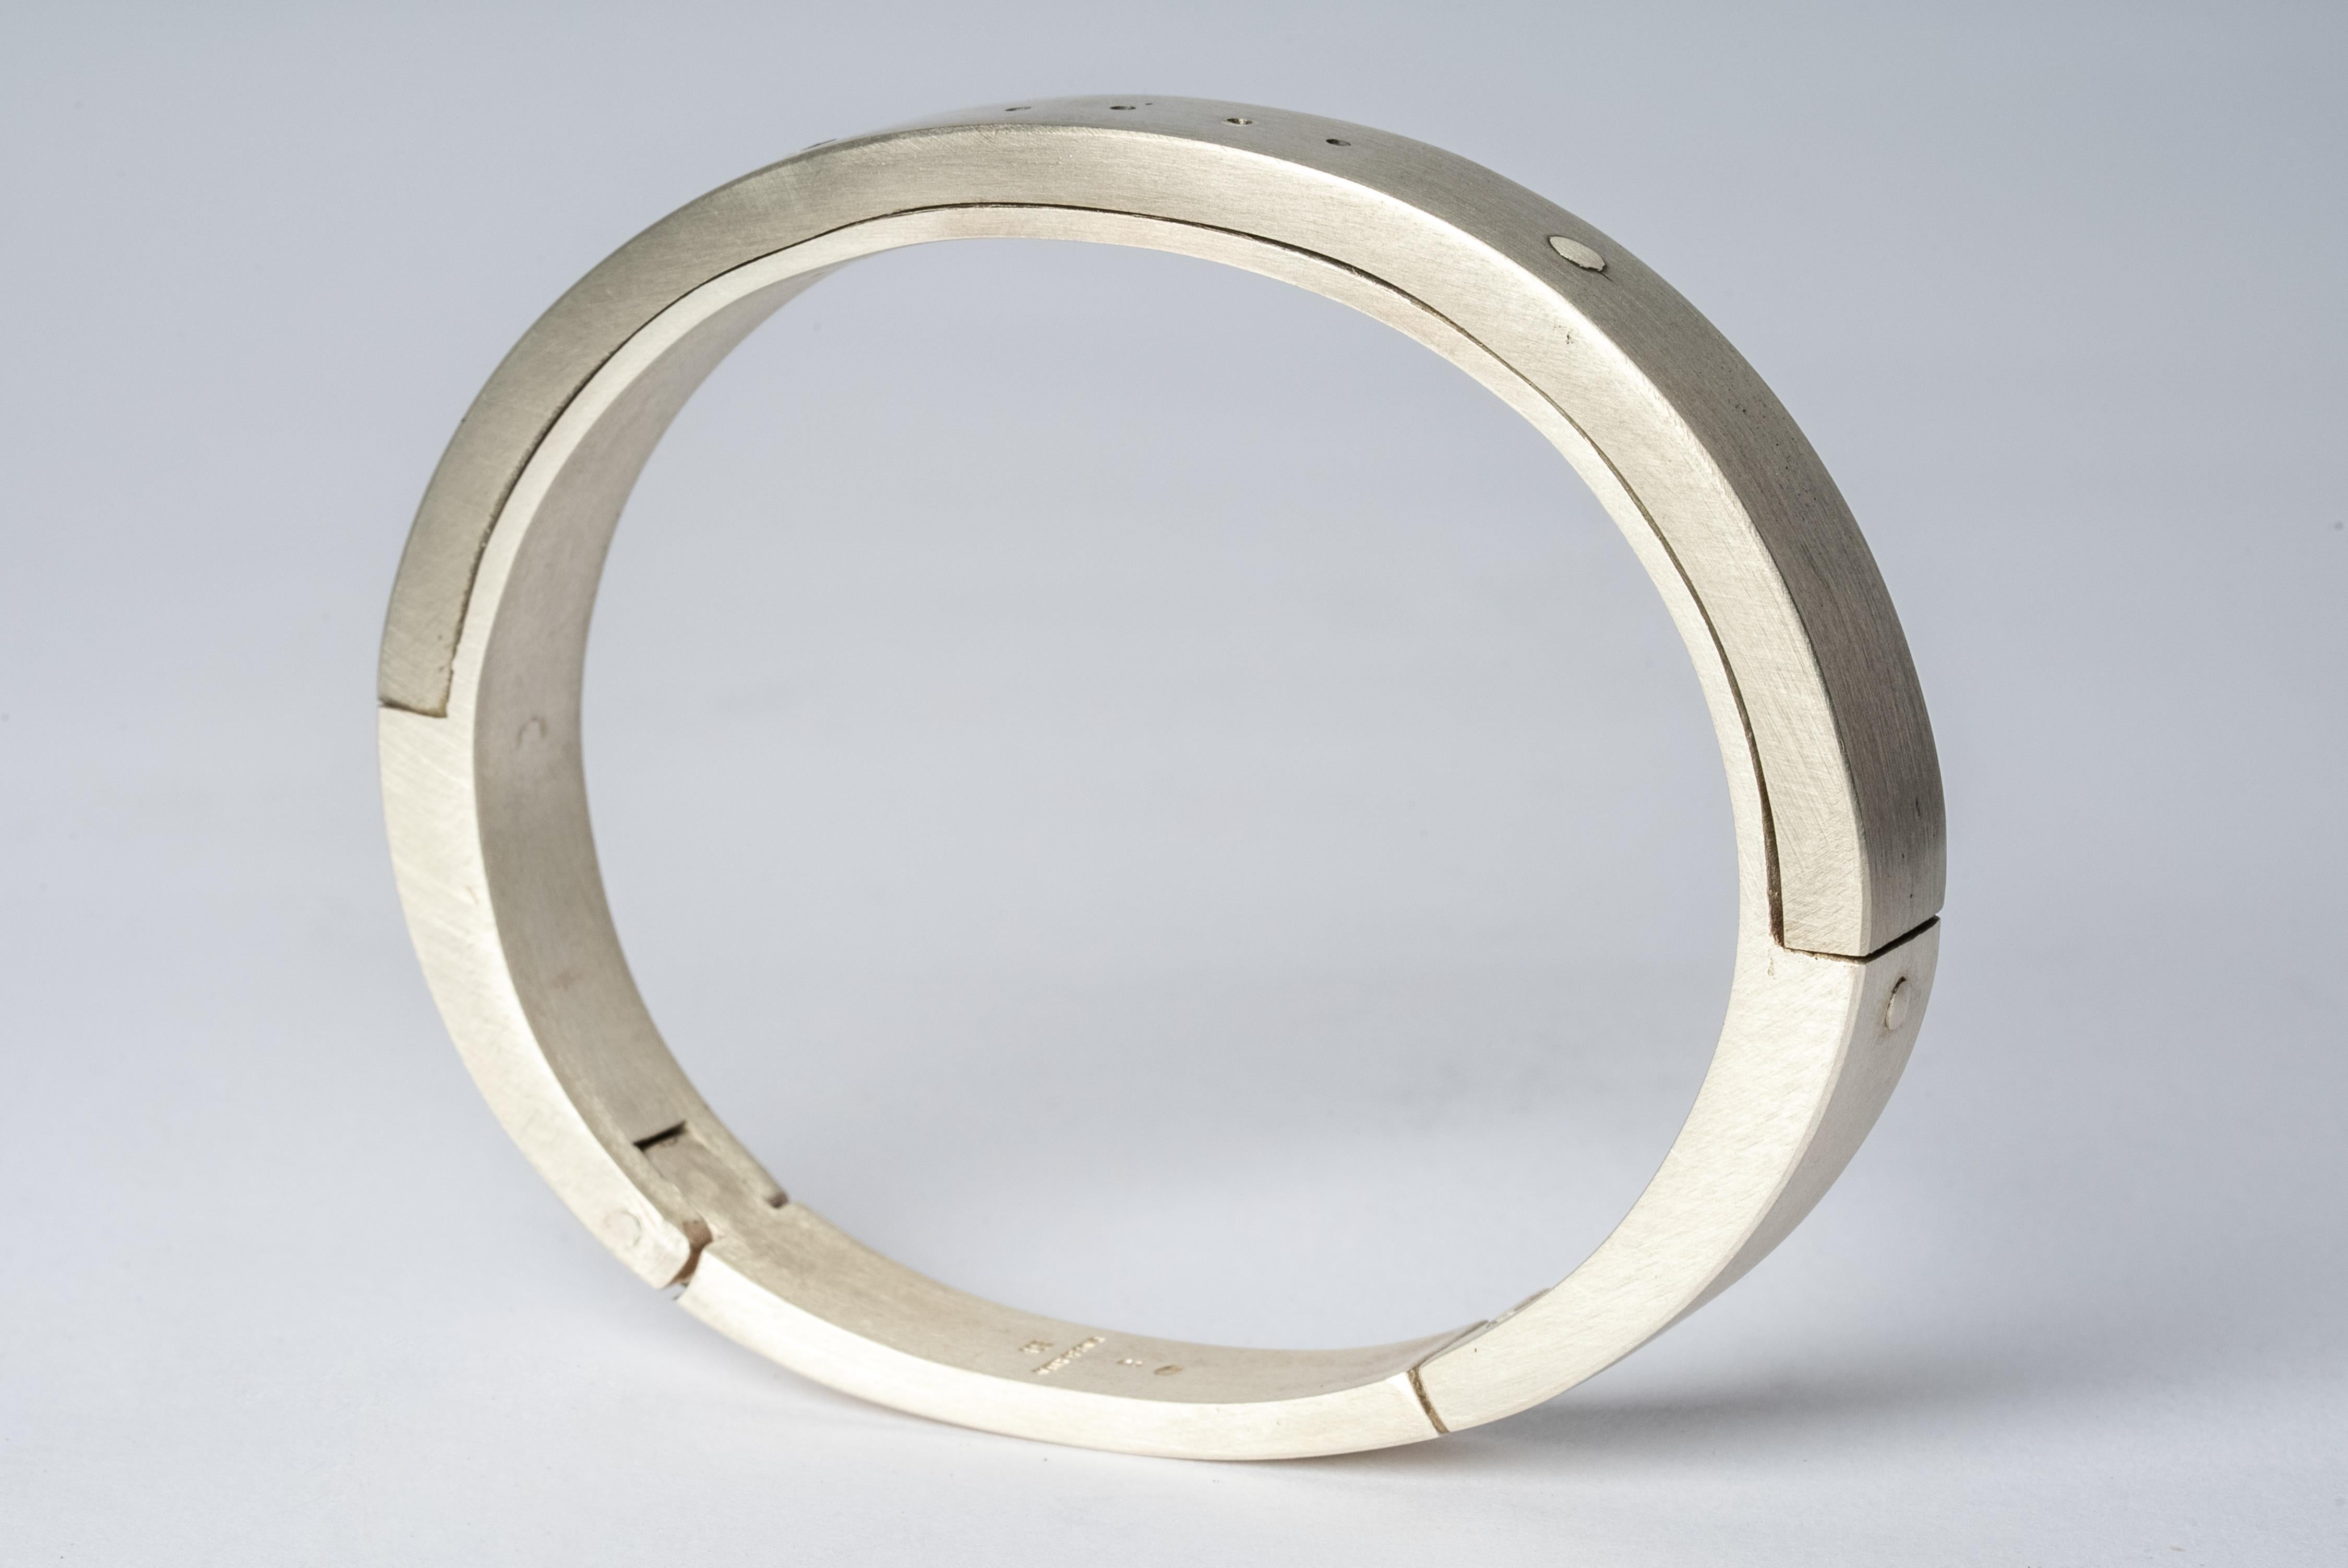 Bracelet in sterling silver and bronze. The Sistema series expresses the core principle of P/4 which is modularity. The 